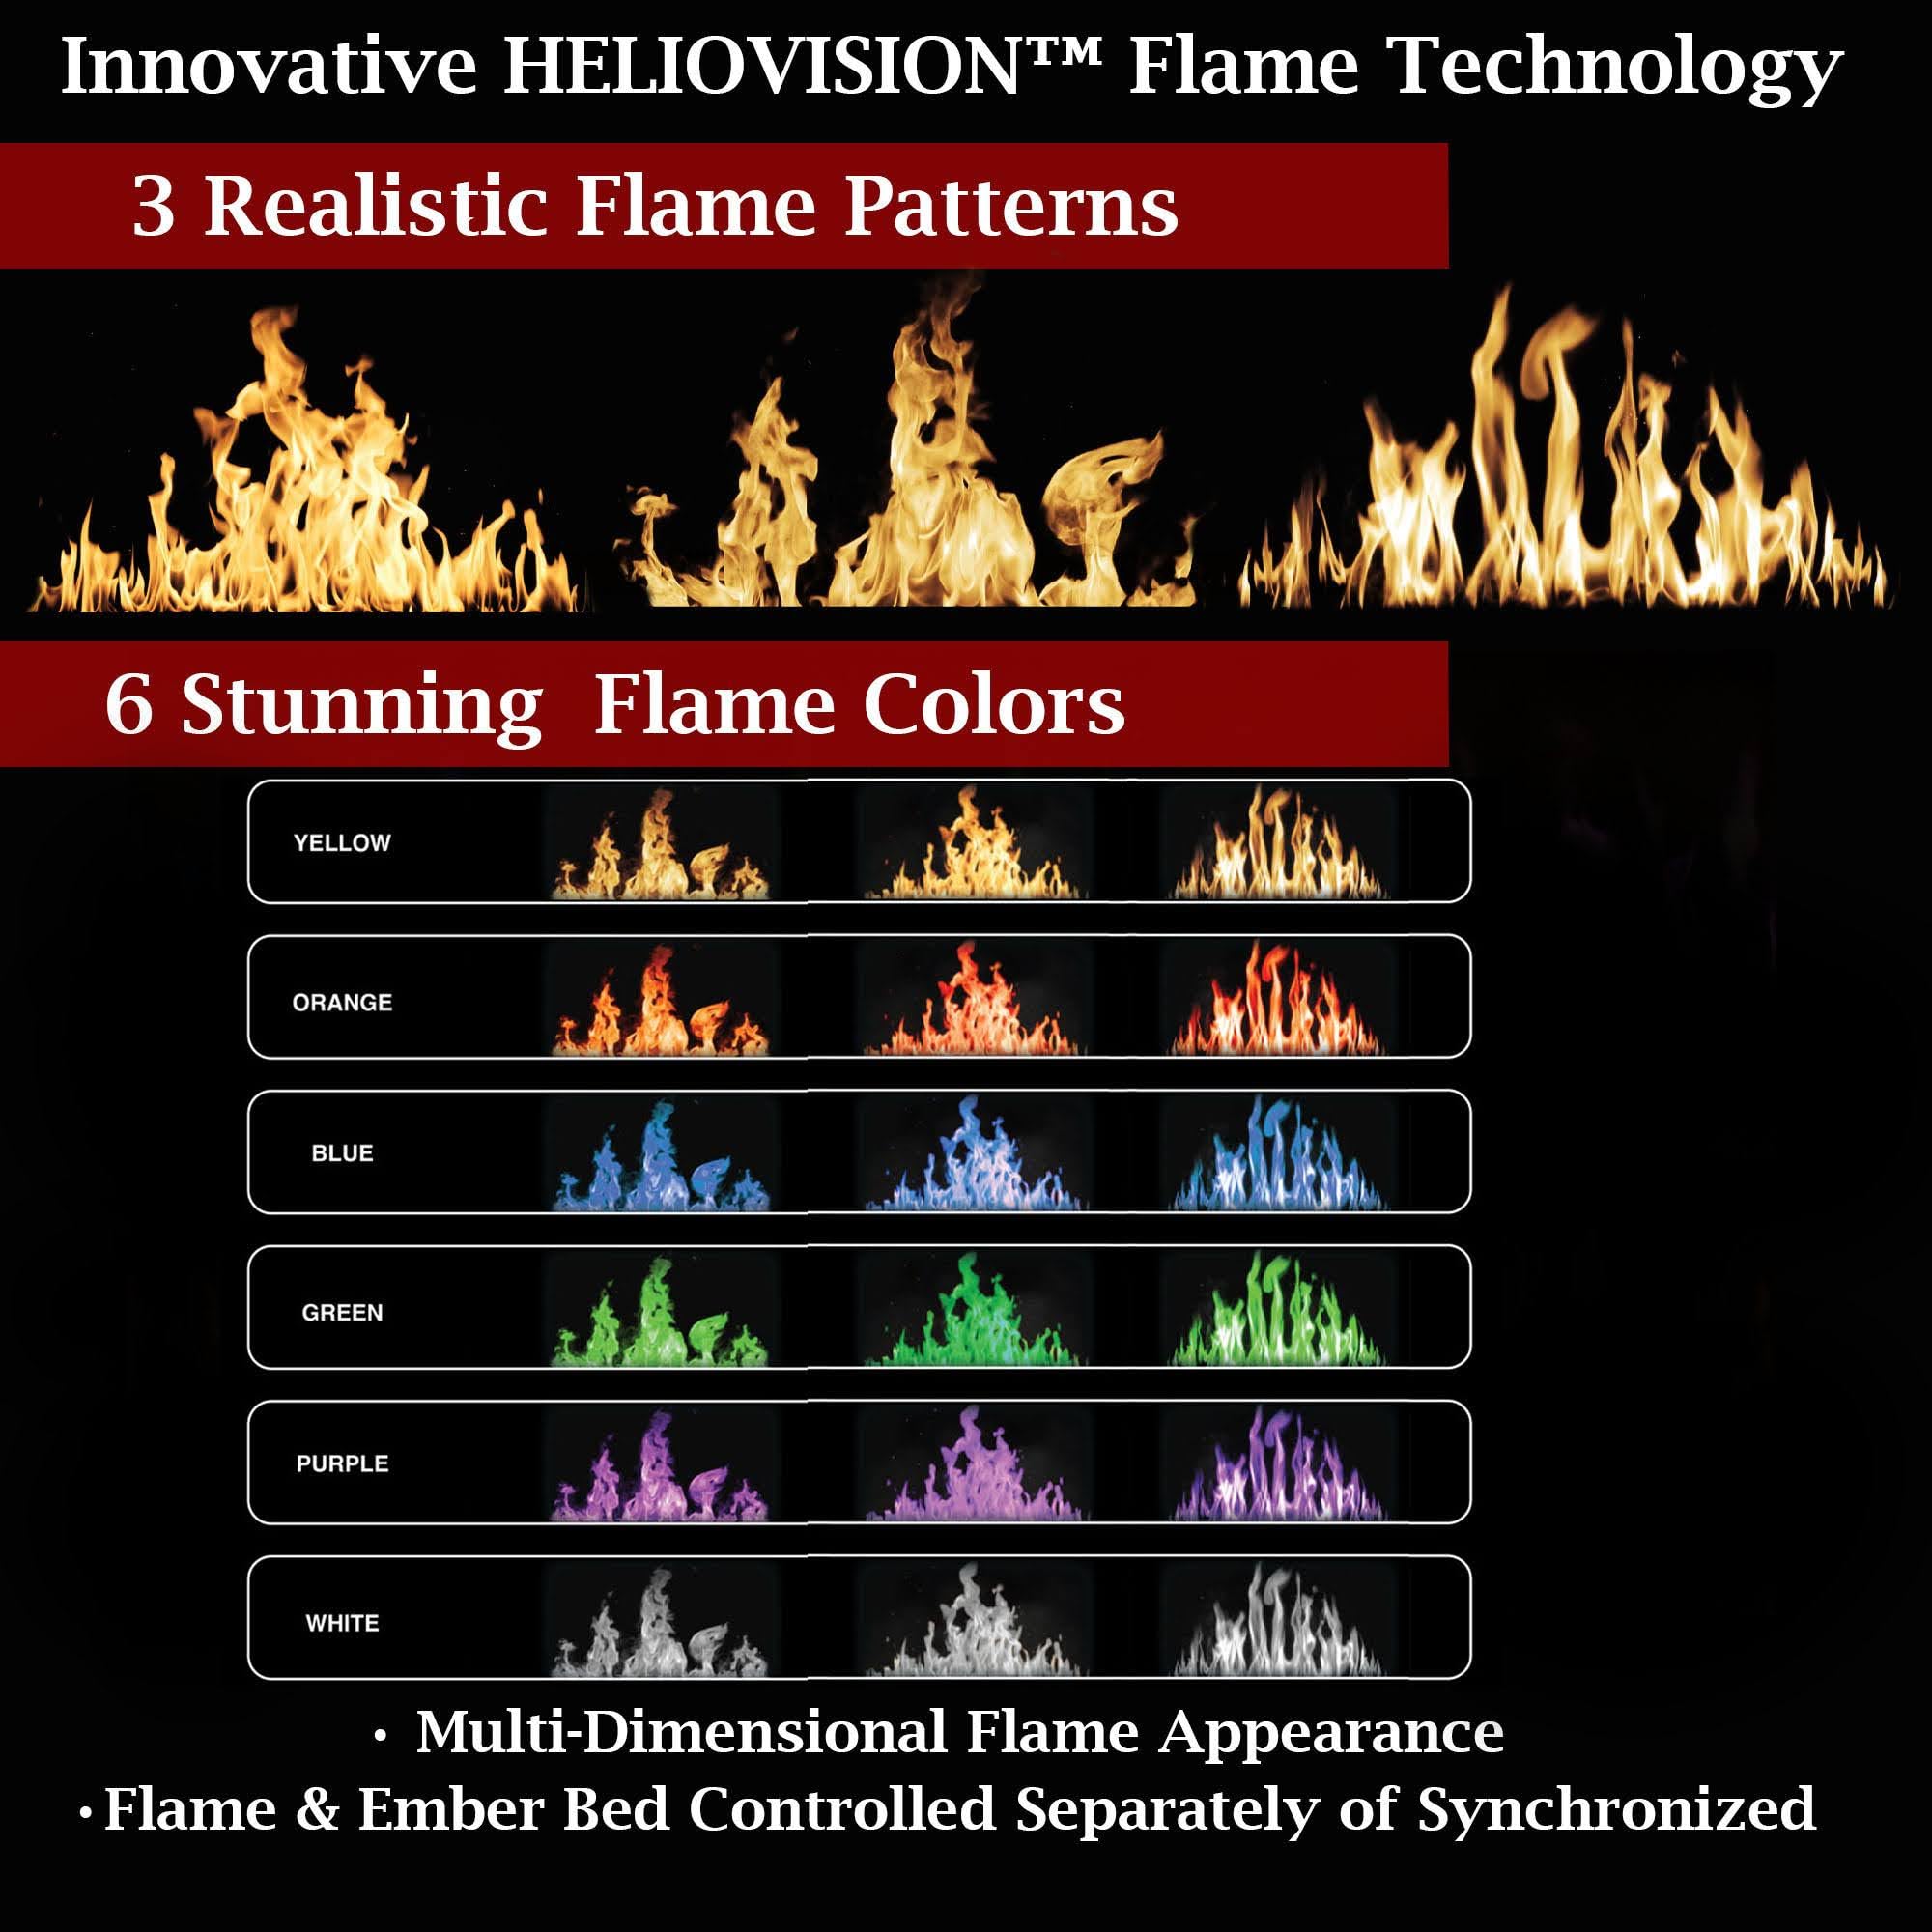 Modern Flames Orion Traditional 42-inch Heliovision Virtual Smart Built in Electric Firebox OR42-TRAD - Electric Fireplaces